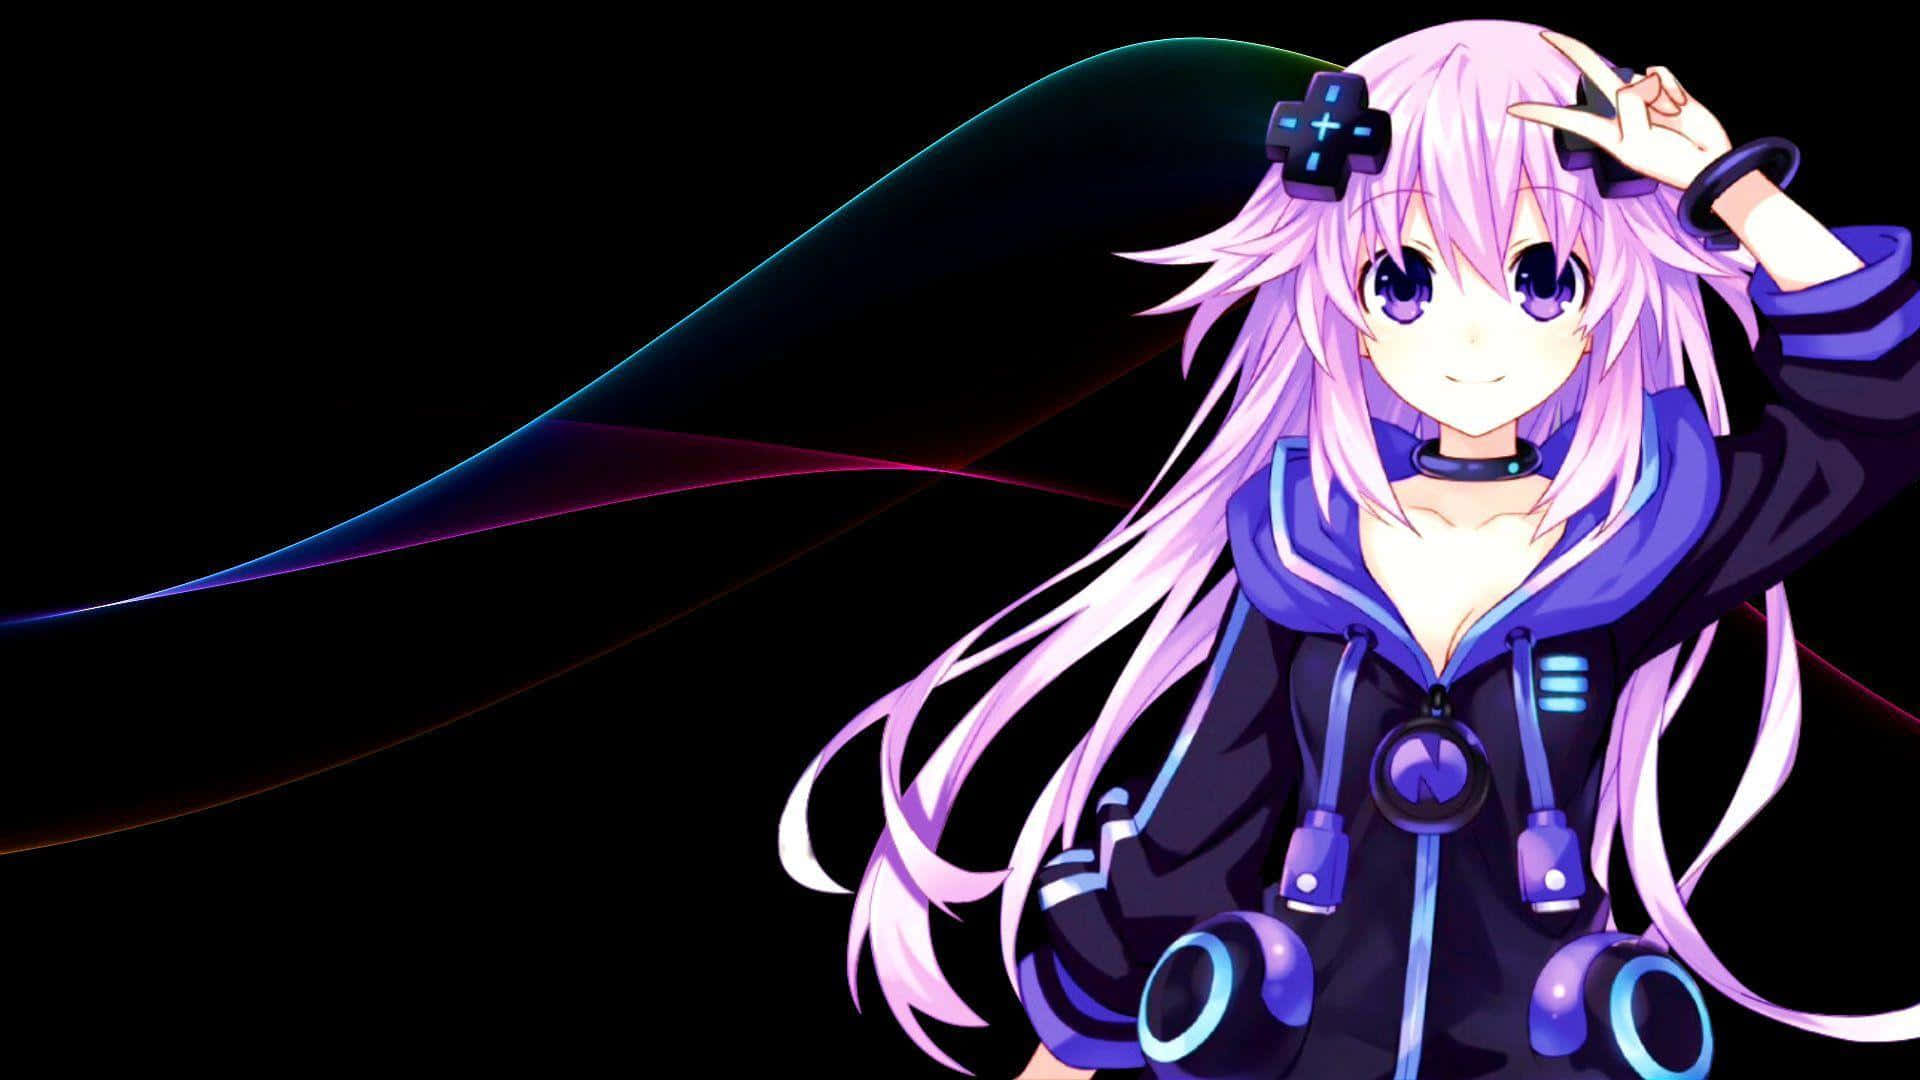 Neptunia and her Friends Ready to Explore the Next Adventure Wallpaper